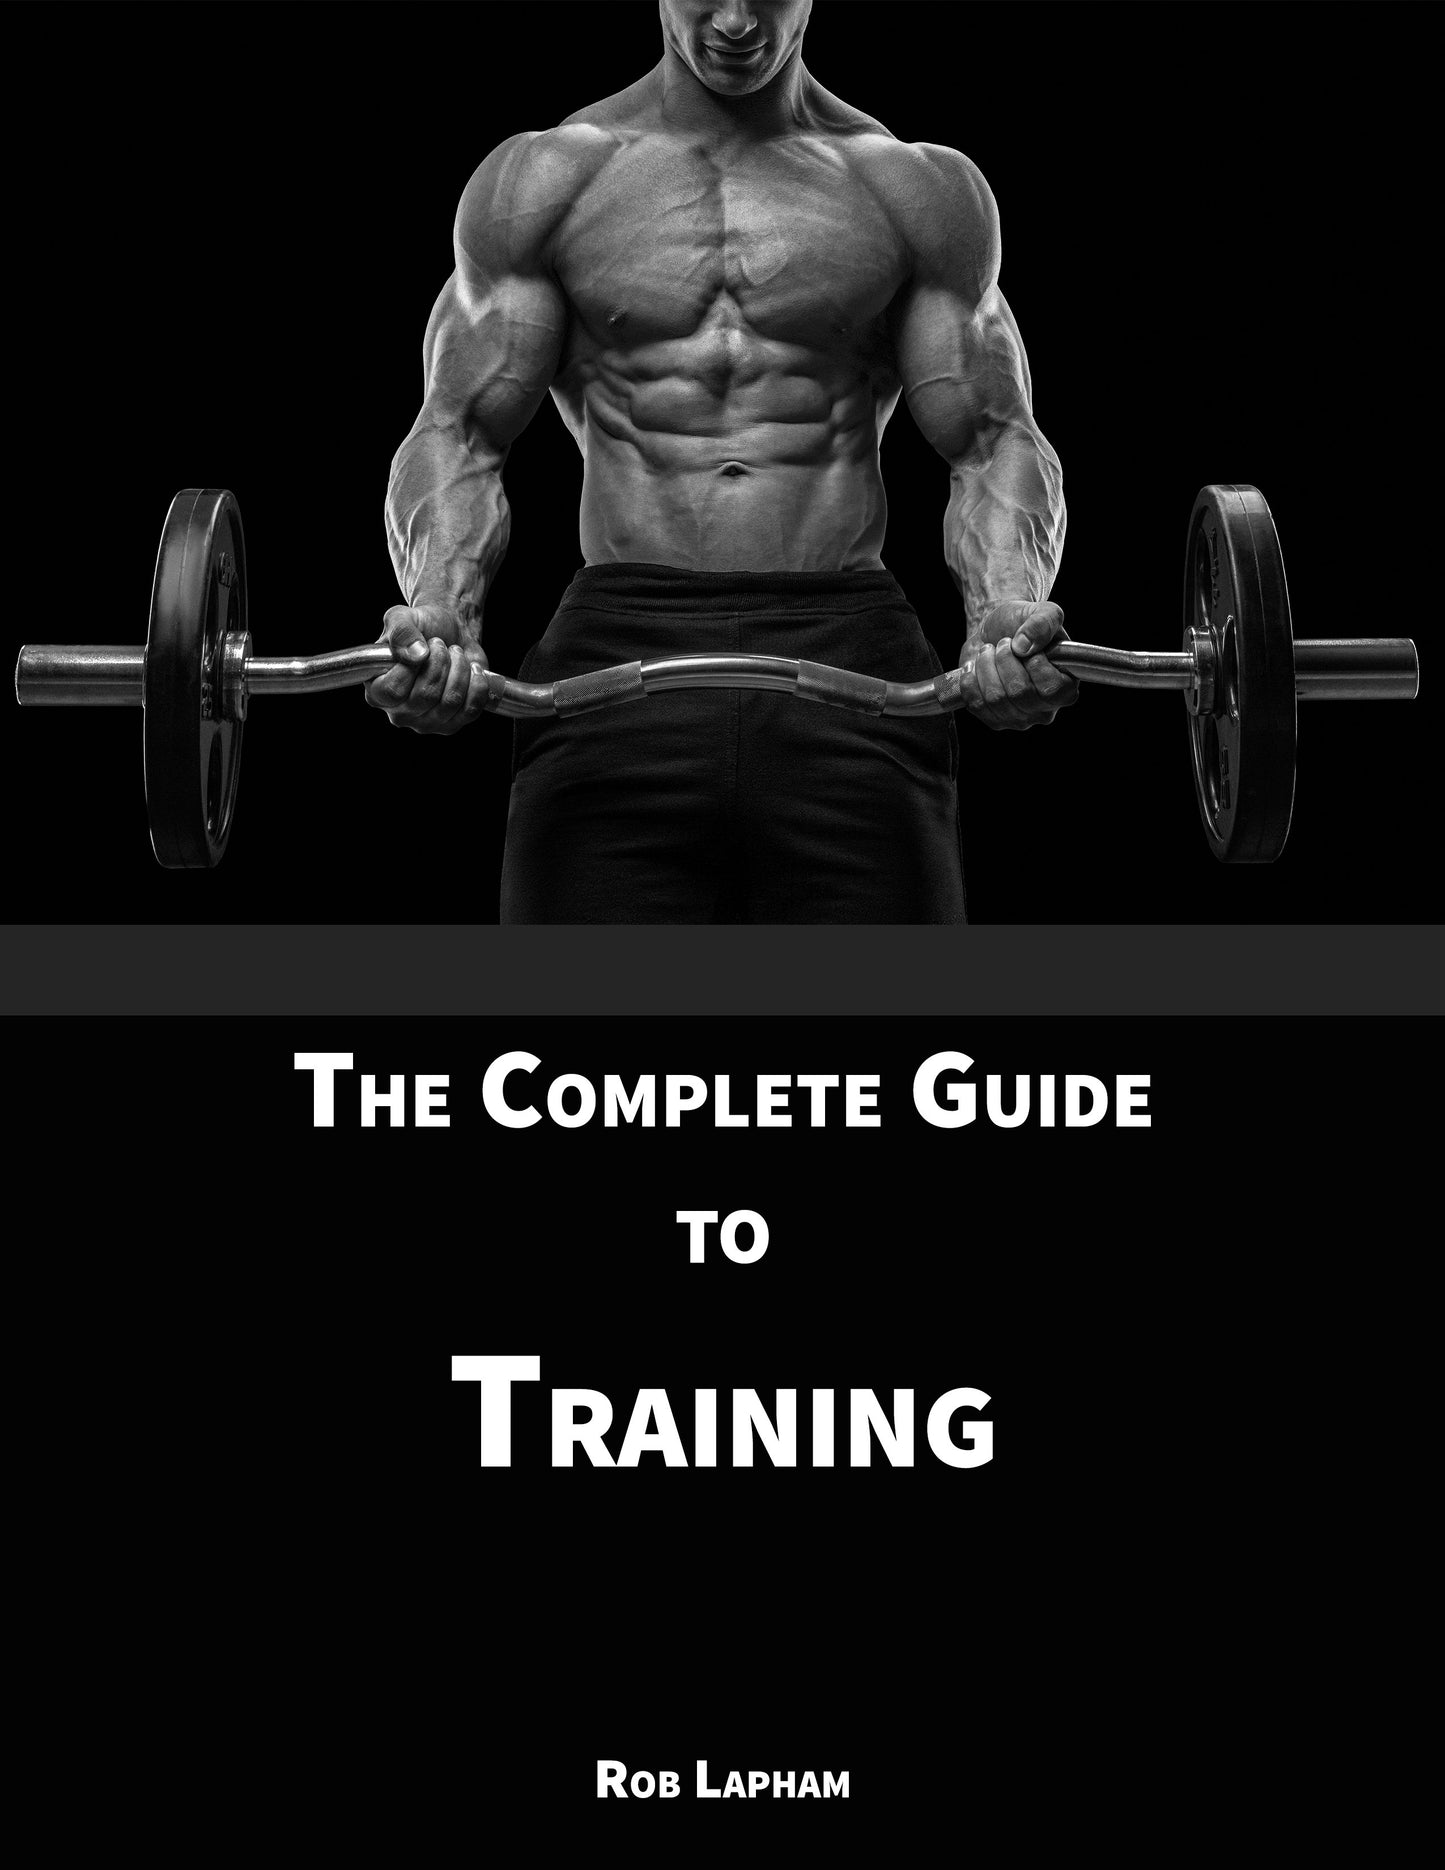 Complete Guide to Training